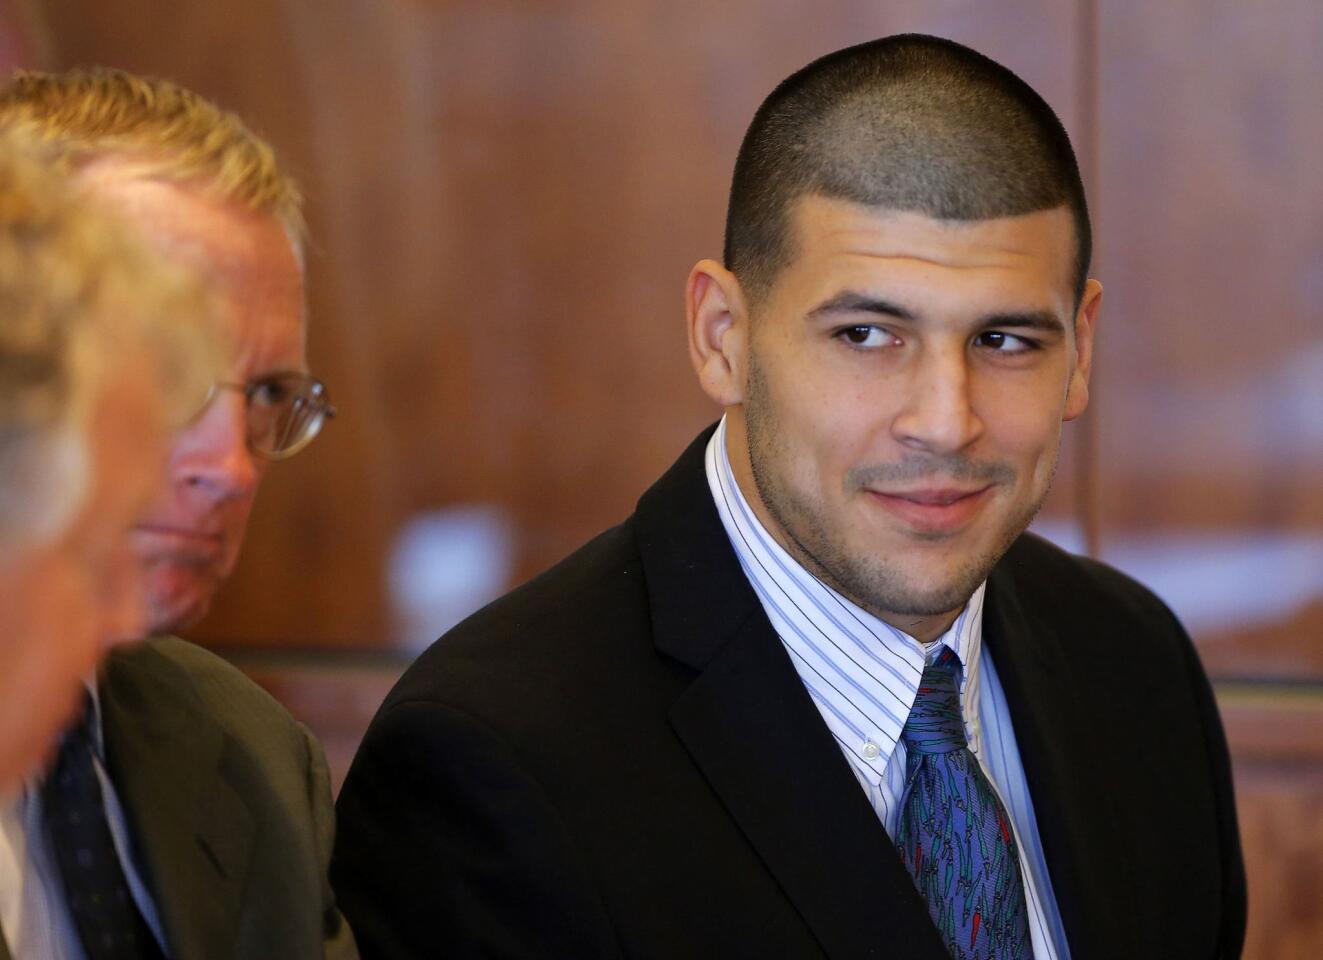 Aaron Hernandez, former player for the NFL's New England Patriots football team, listens to his attorneys during a court appearance at the Bristol County Superior Court in Fall River, Massachusetts October 9, 2013, in connection with the death of semi-pro football player Odin Lloyd in June. Hernandez, who was a rising star in the NFL before his arrest and release by the Patriots, has pleaded not guilty. REUTERS/Brian Snyder (UNITED STATES - Tags: CRIME LAW SPORT FOOTBALL) ORG XMIT: BKS02